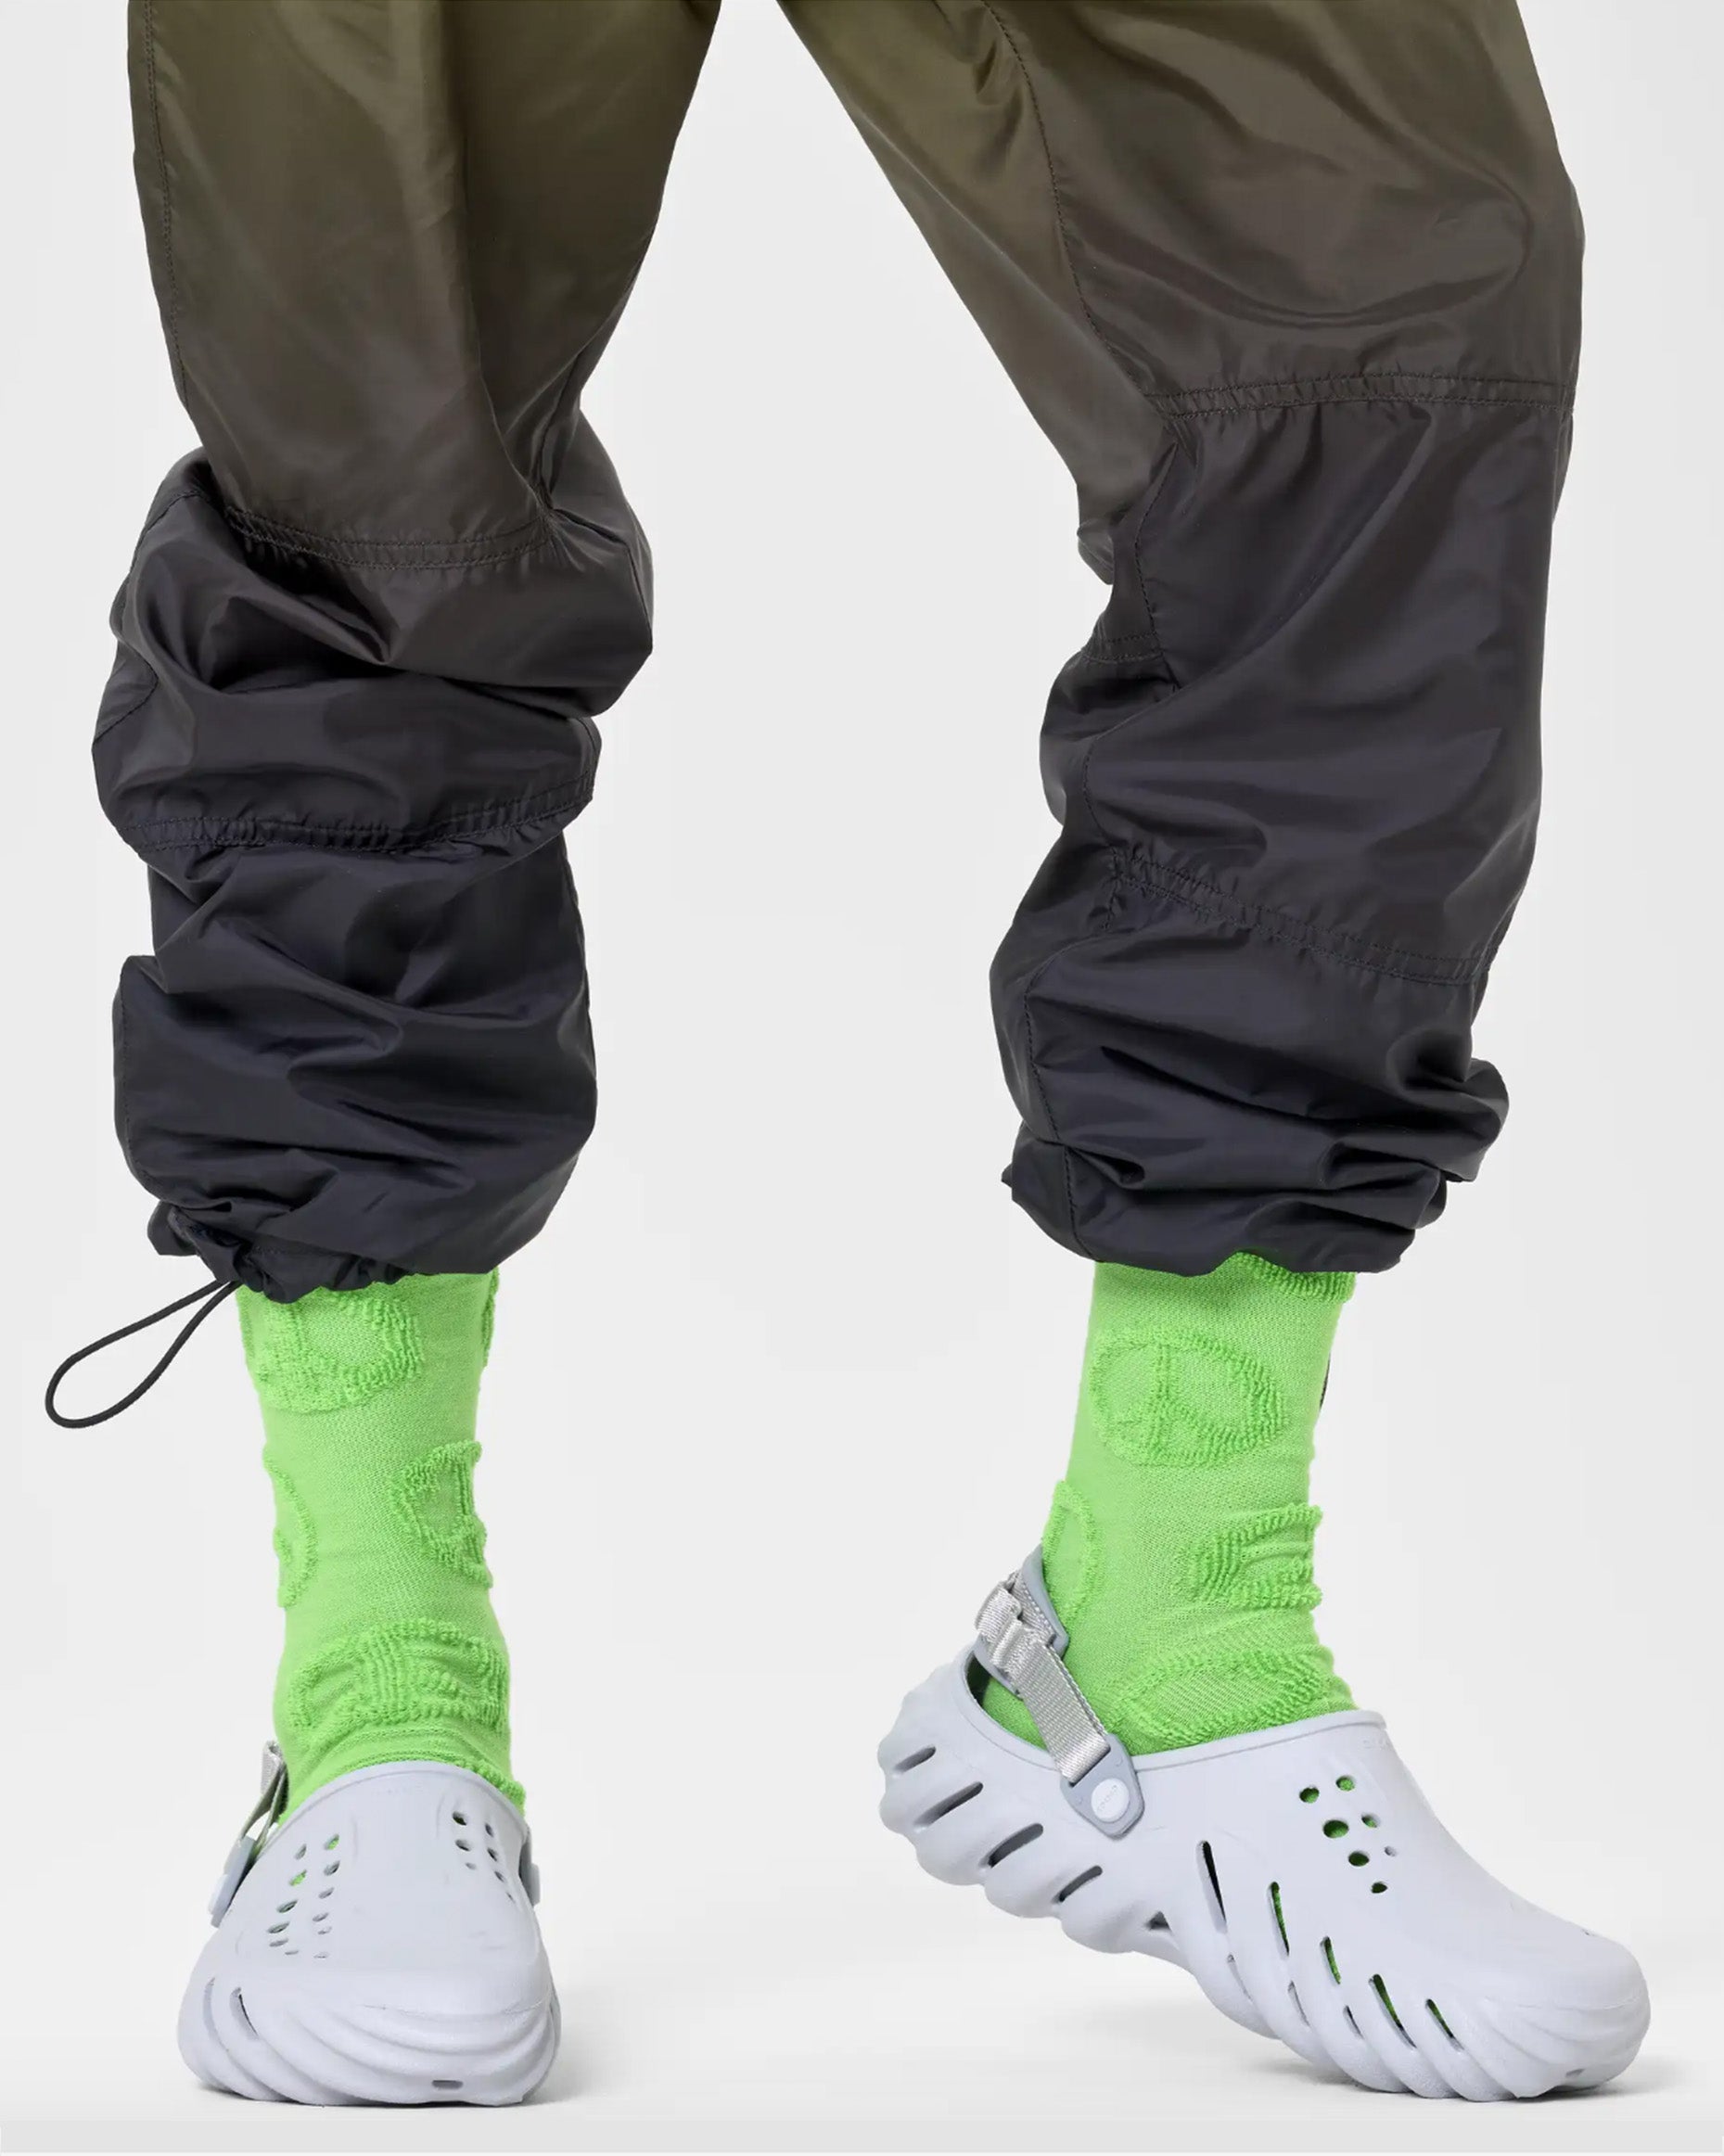 Bright green crew length socks with a textured peace sign pattern. Worn with light grey crocs and gradient elasticated cuff tracksuit pants.